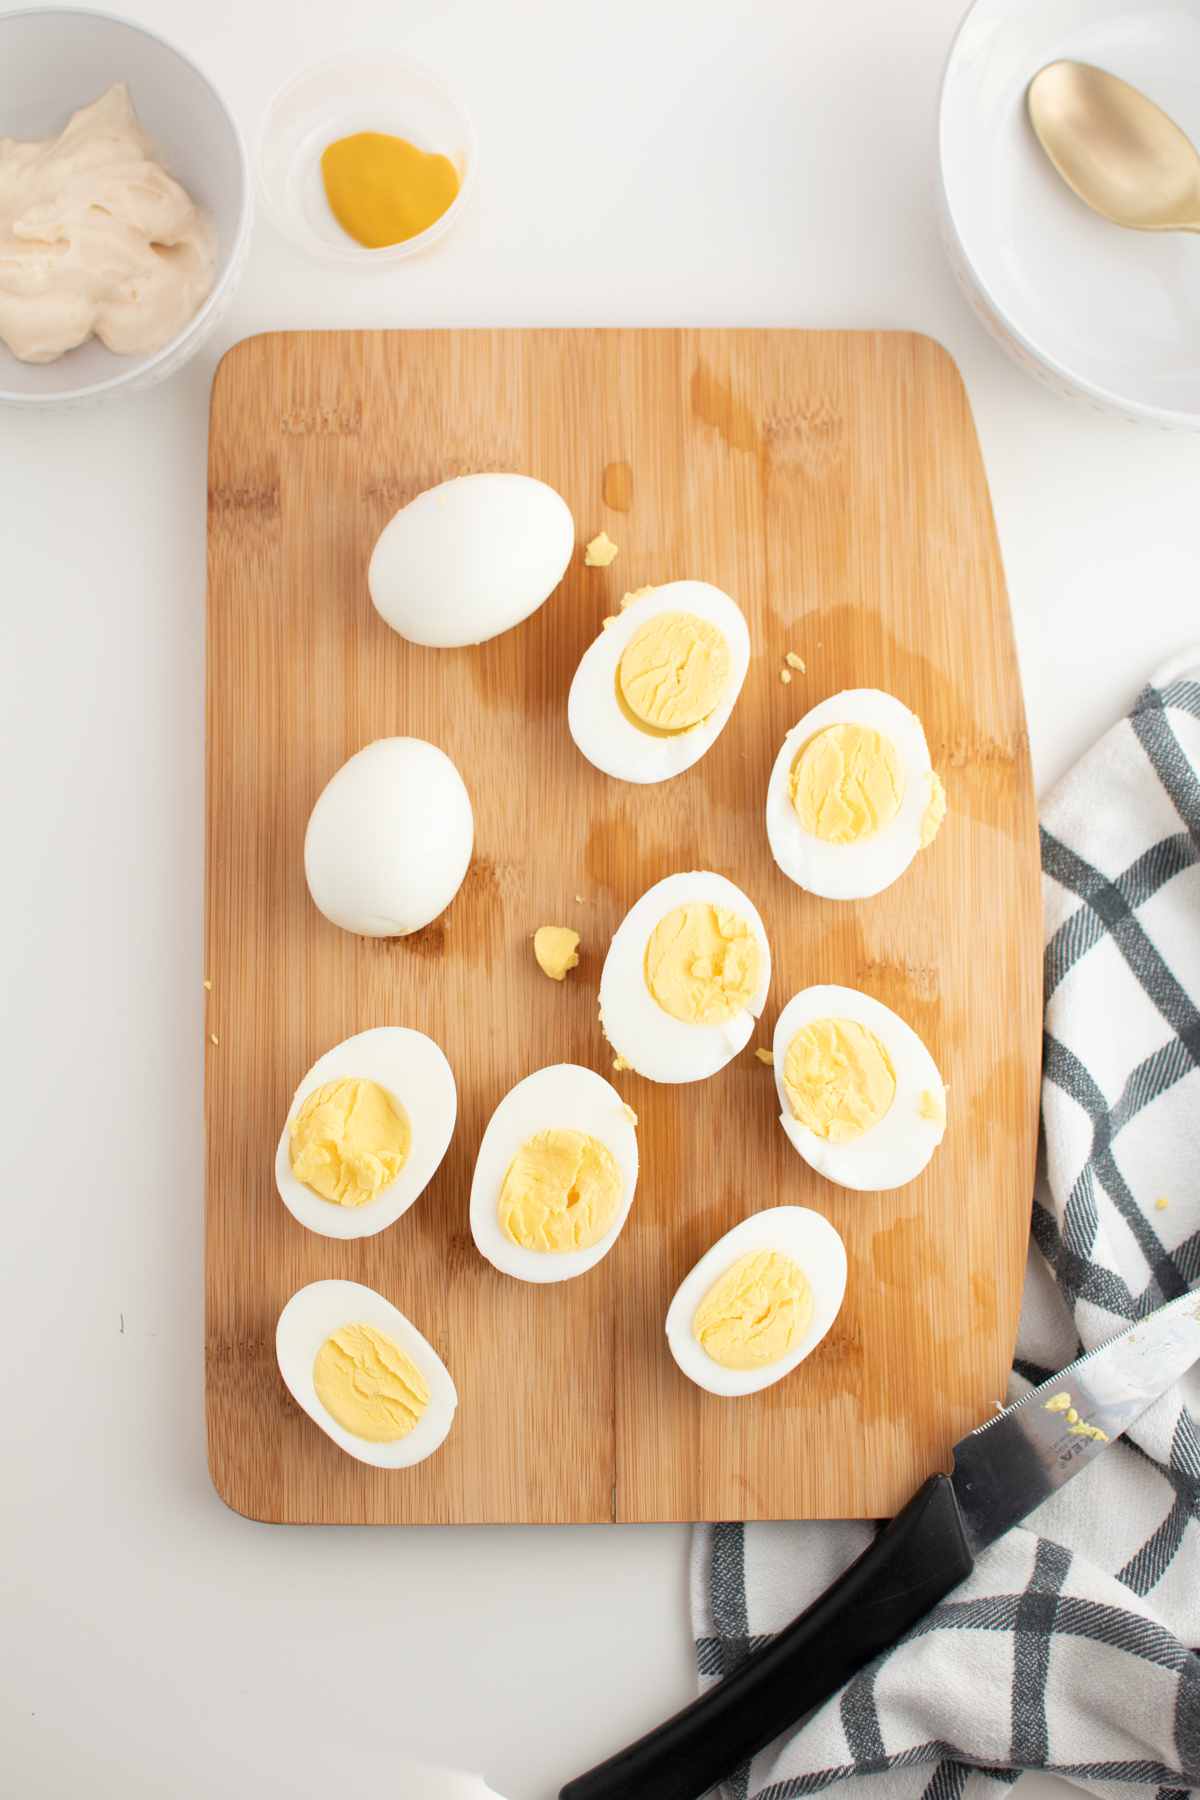 Hard boiled eggs cut in half on wooden cutting board next to prep bowls.